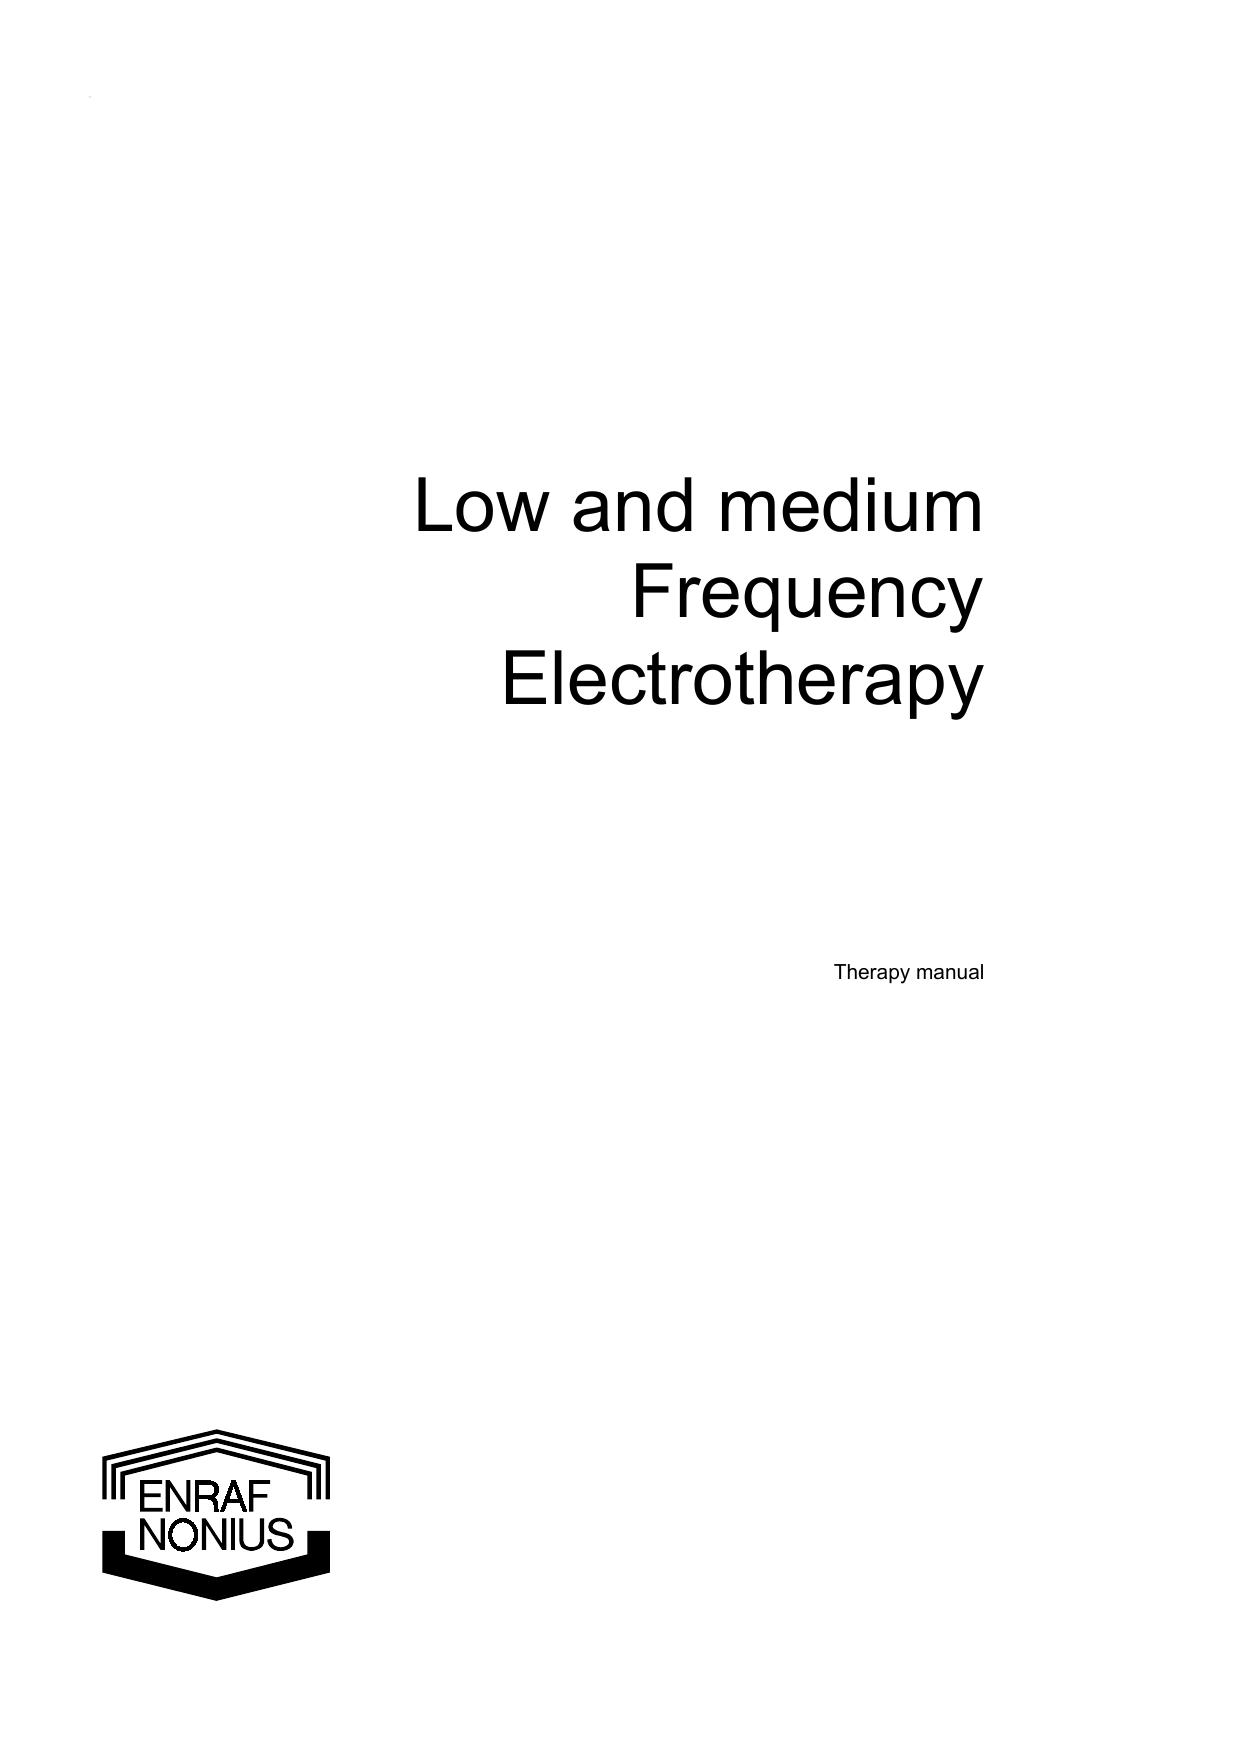 Low and medium Frequency Electrotherapy